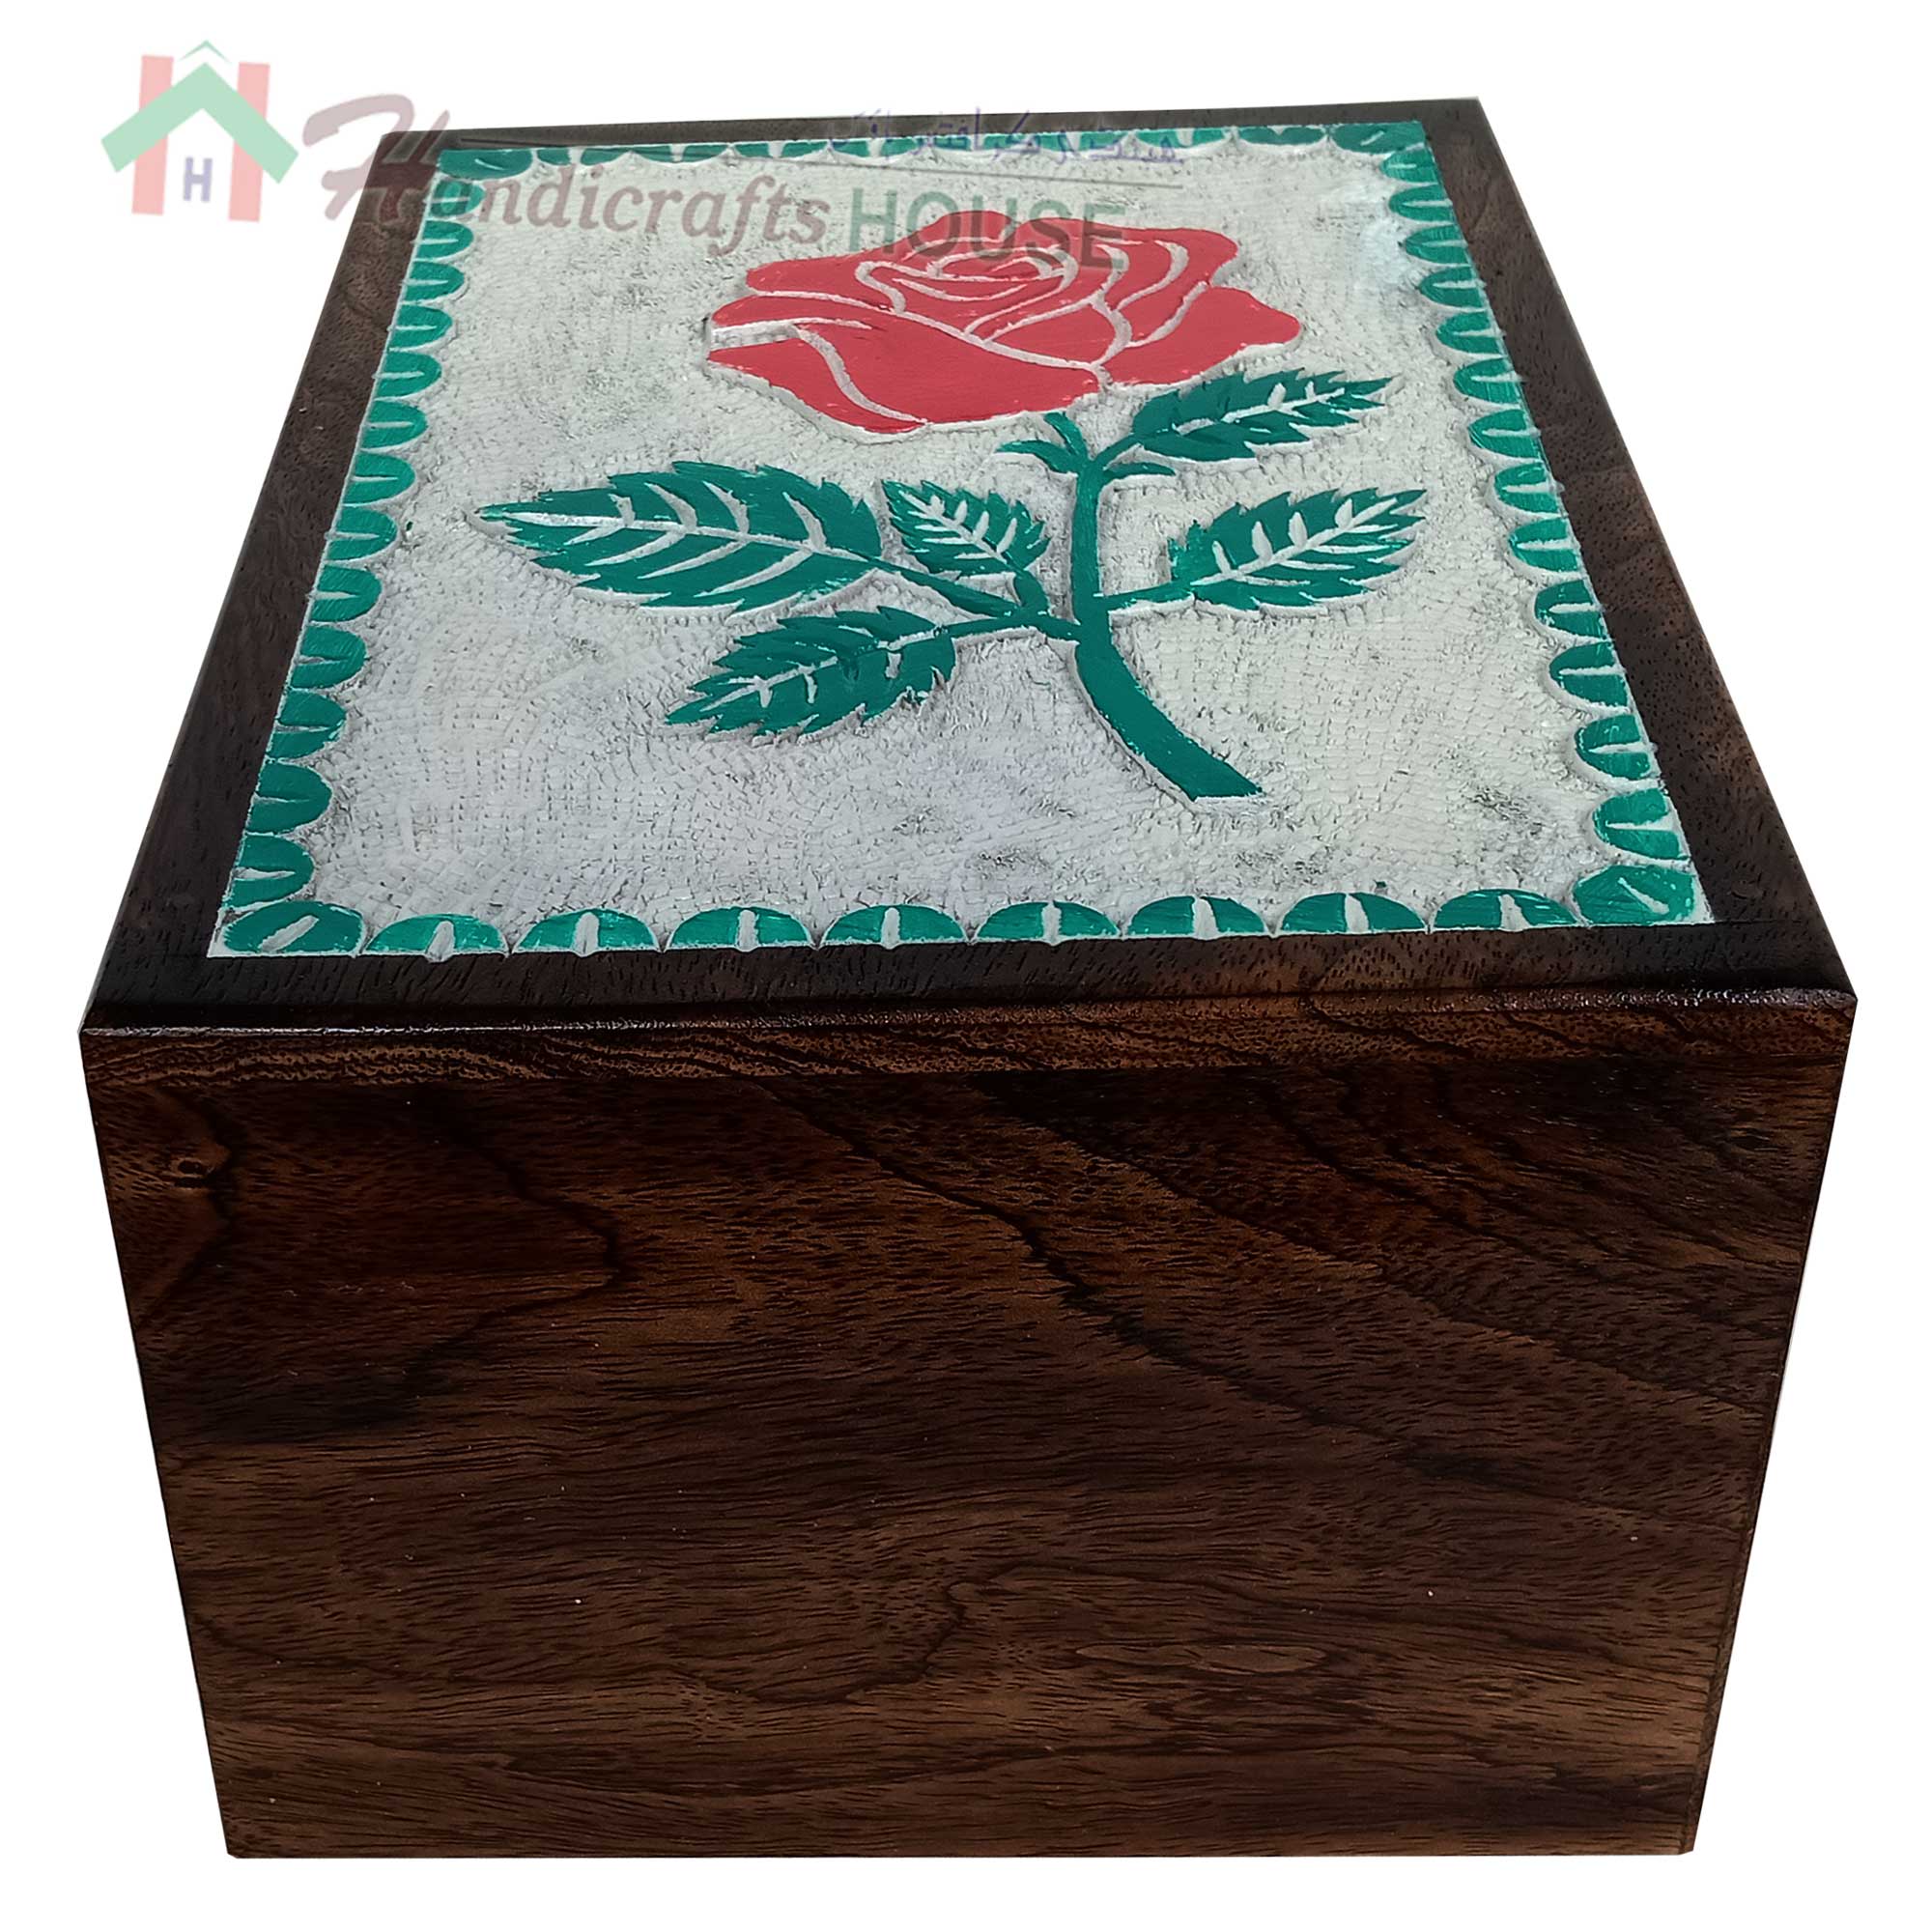 Large Cremation Memorial Rose Wood Adult Urn for Human Ashes 